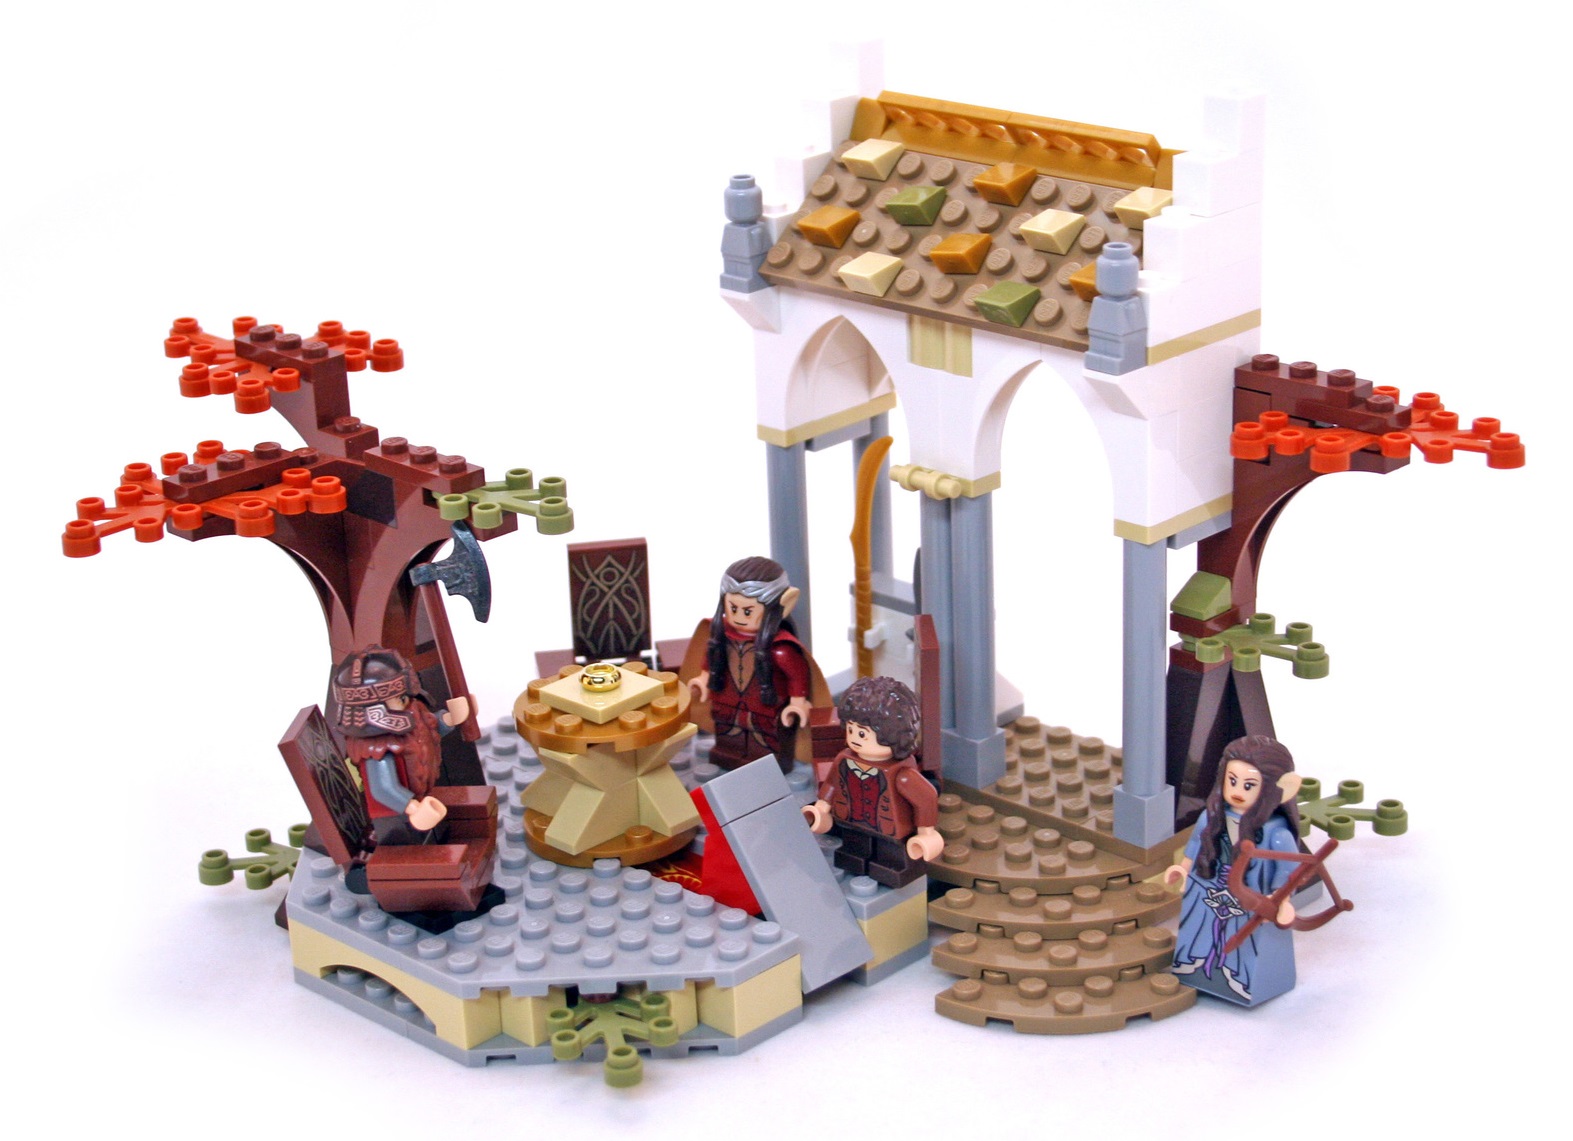 LEGO 79006 The Council of Elrond